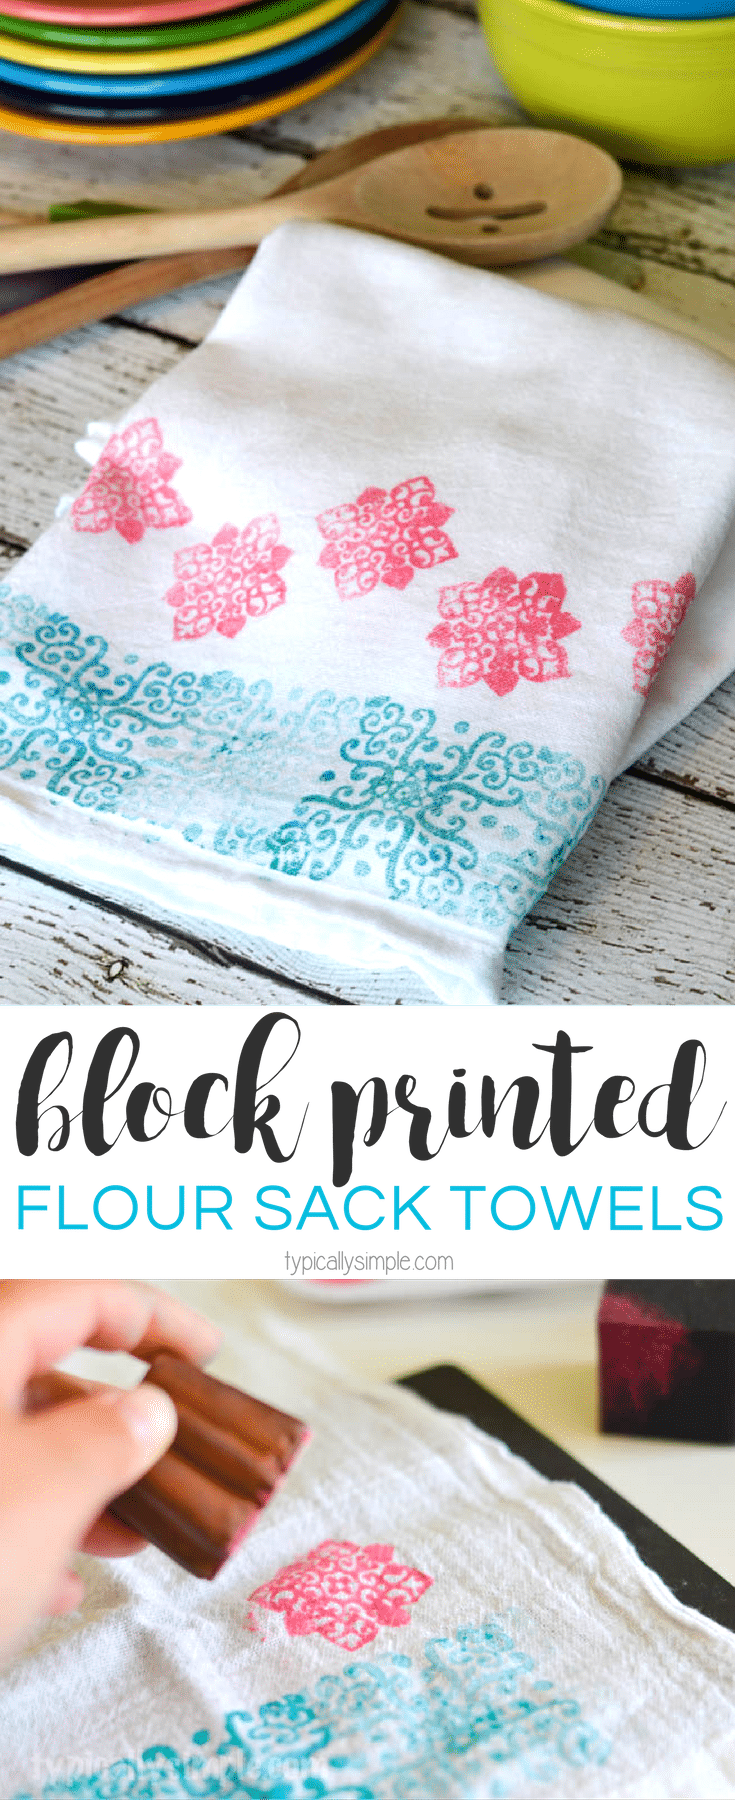 A quick and simple way to update plain flour sack towels with some bright, fun prints using fabric ink and block printing stamps! {AD}